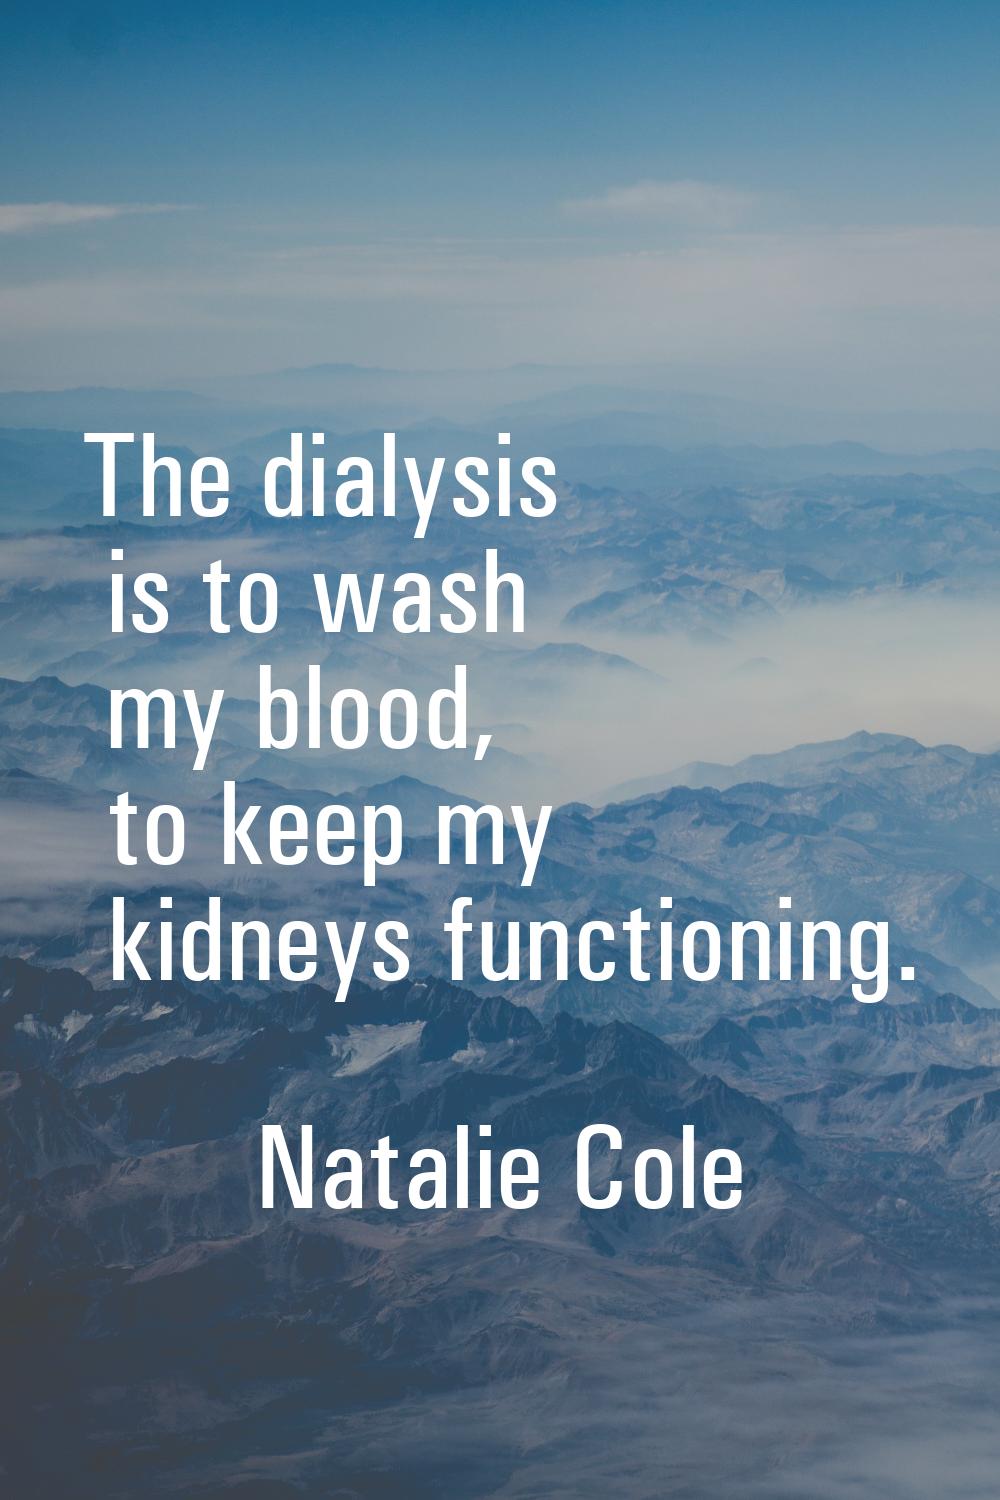 The dialysis is to wash my blood, to keep my kidneys functioning.